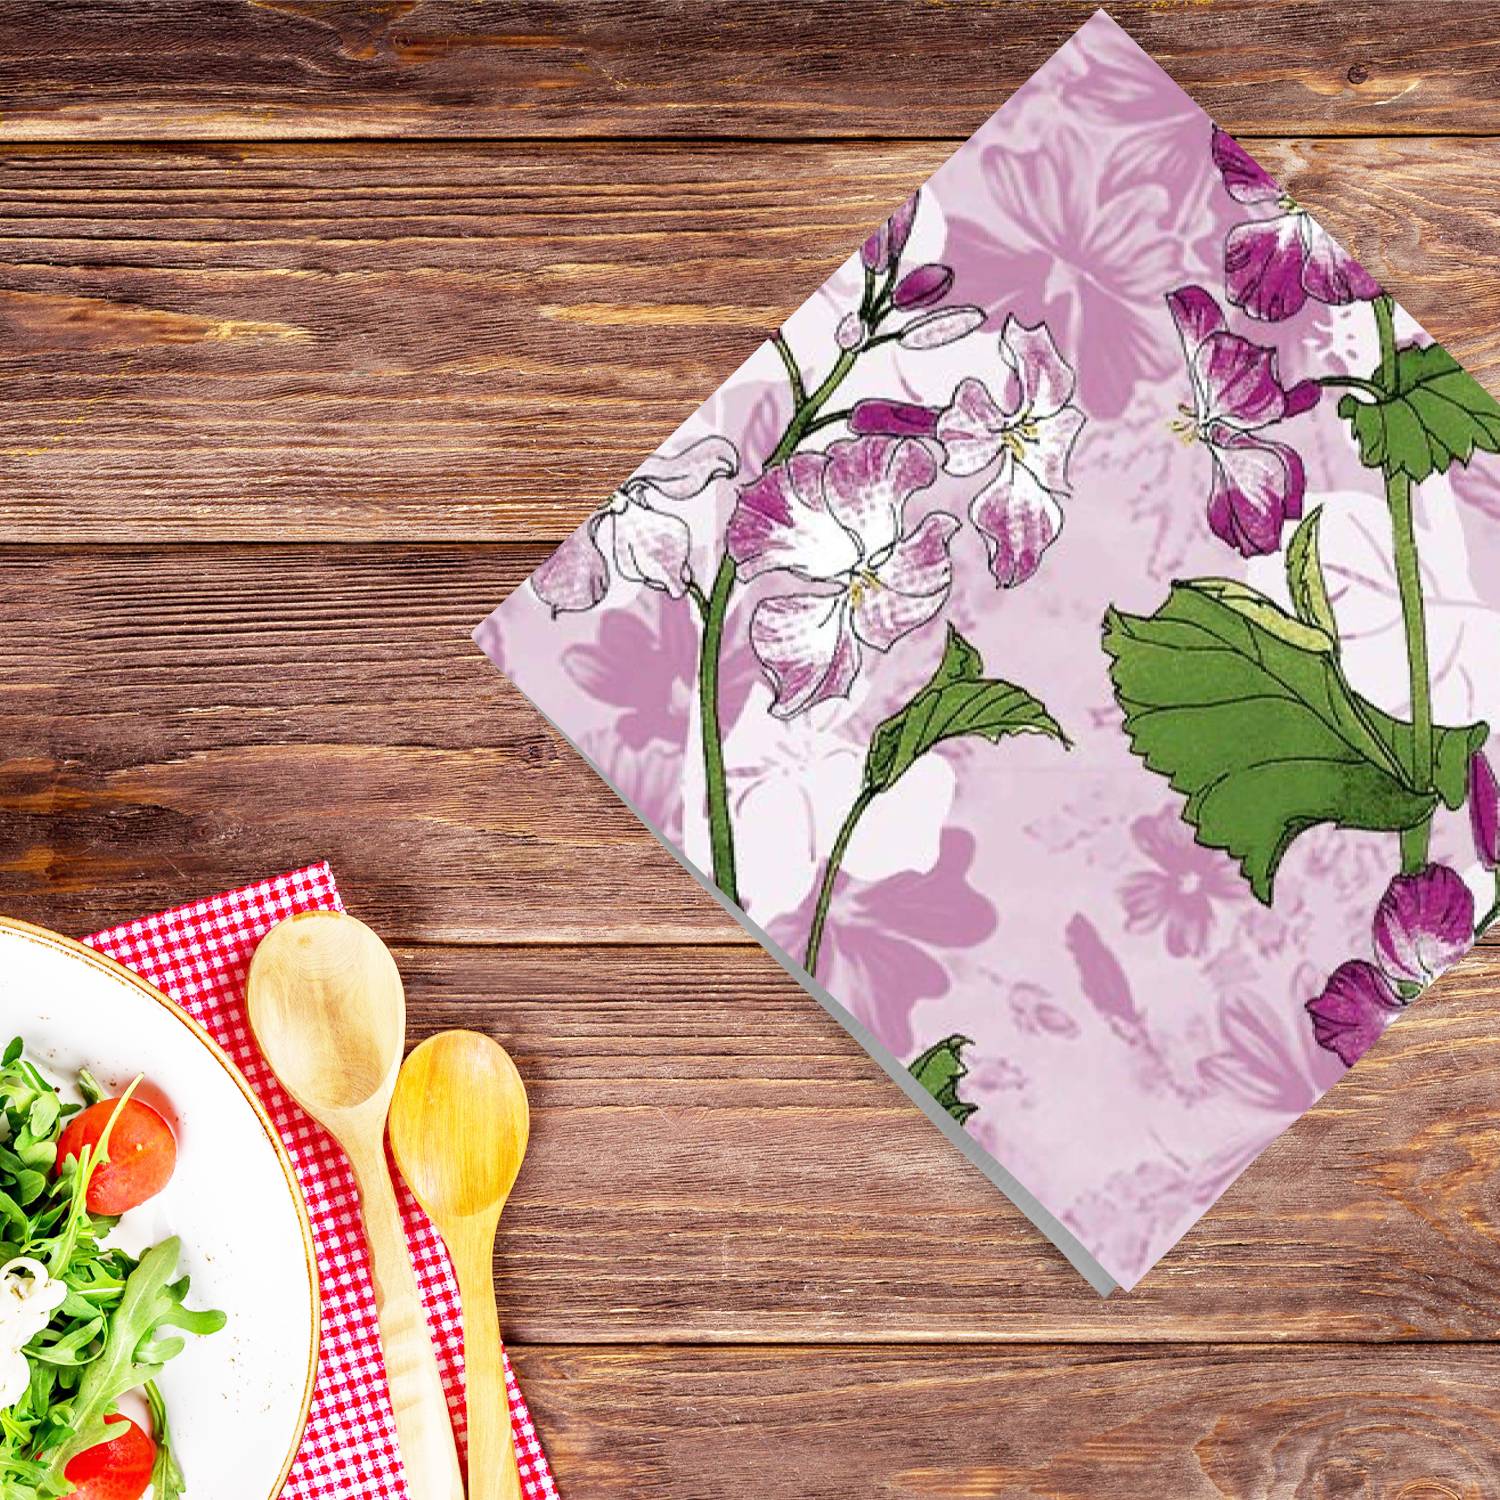 Violet Opulence Disposable Lunch Paper Napkins 20 Ct Tablesettings Nicole Fantini Collection   